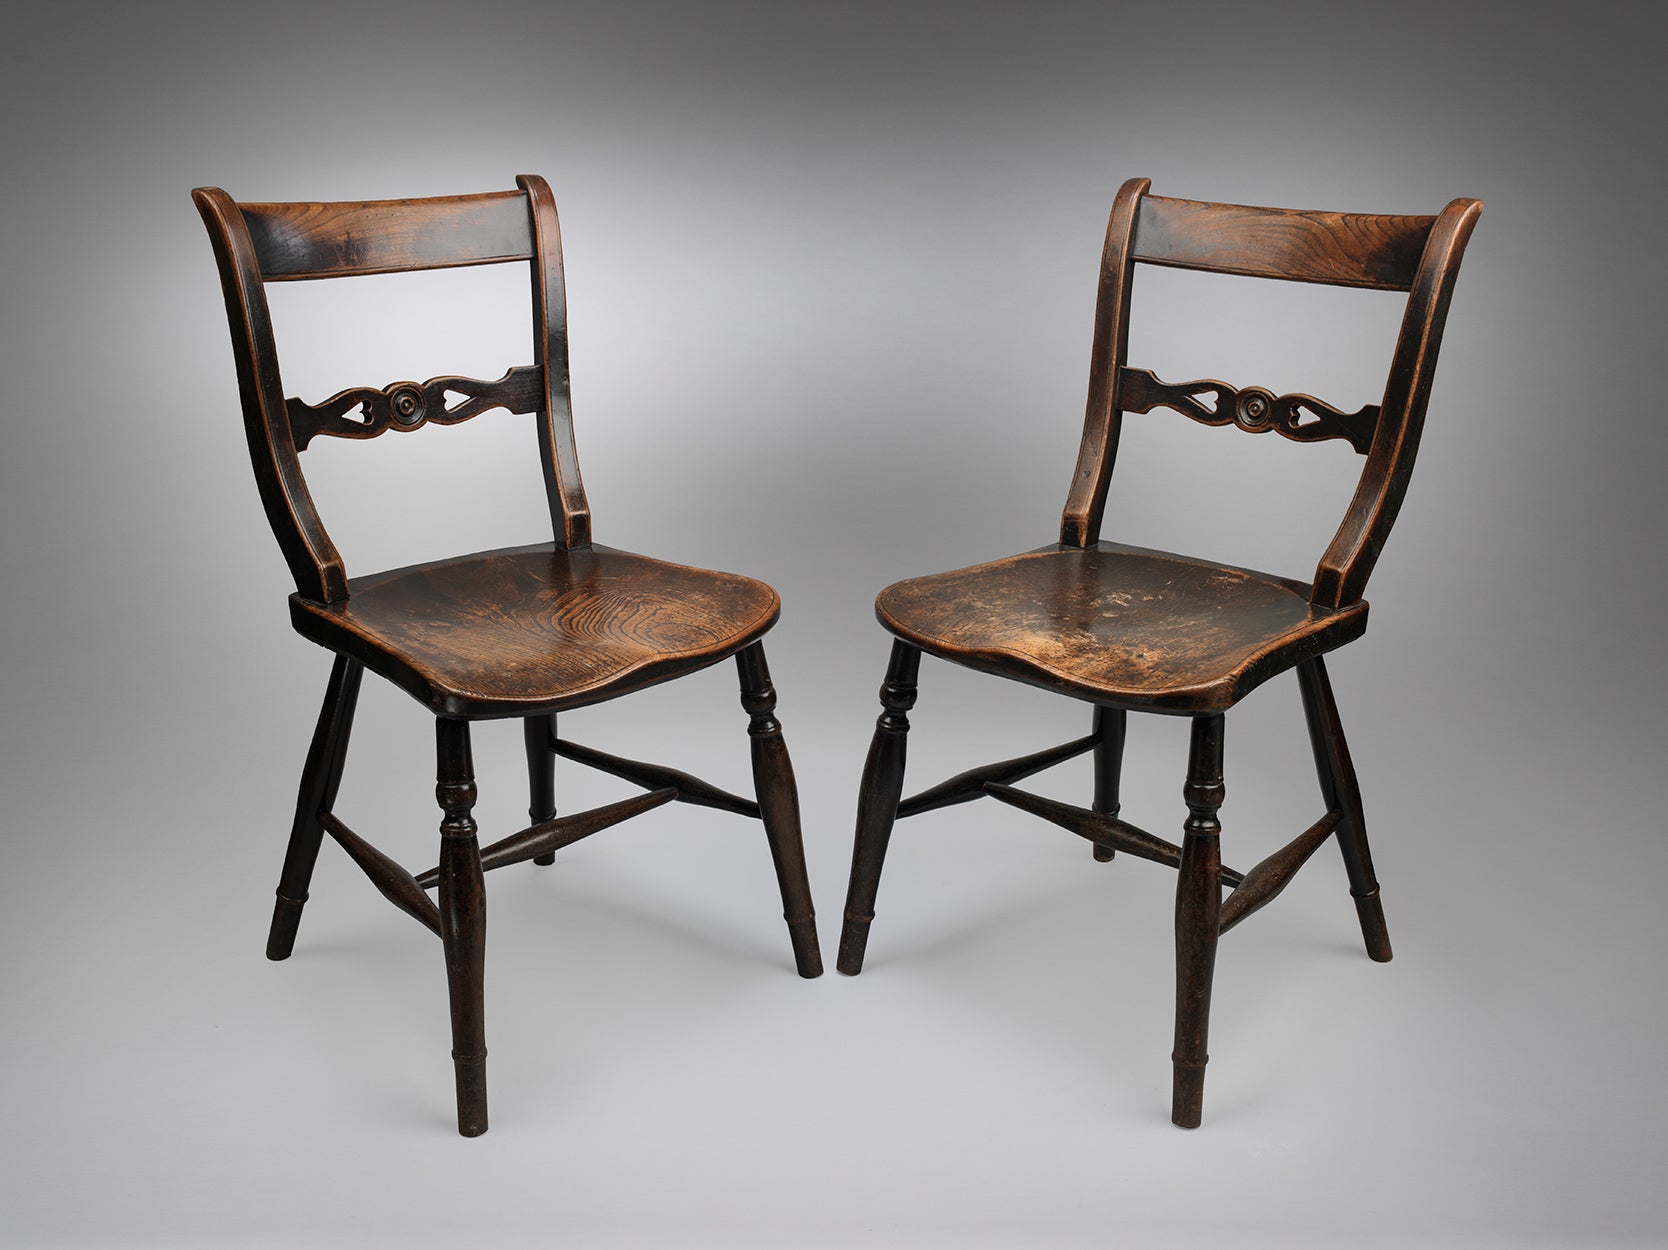 Unusual Pair of Bar Back “Oxford” Windsor Chairs